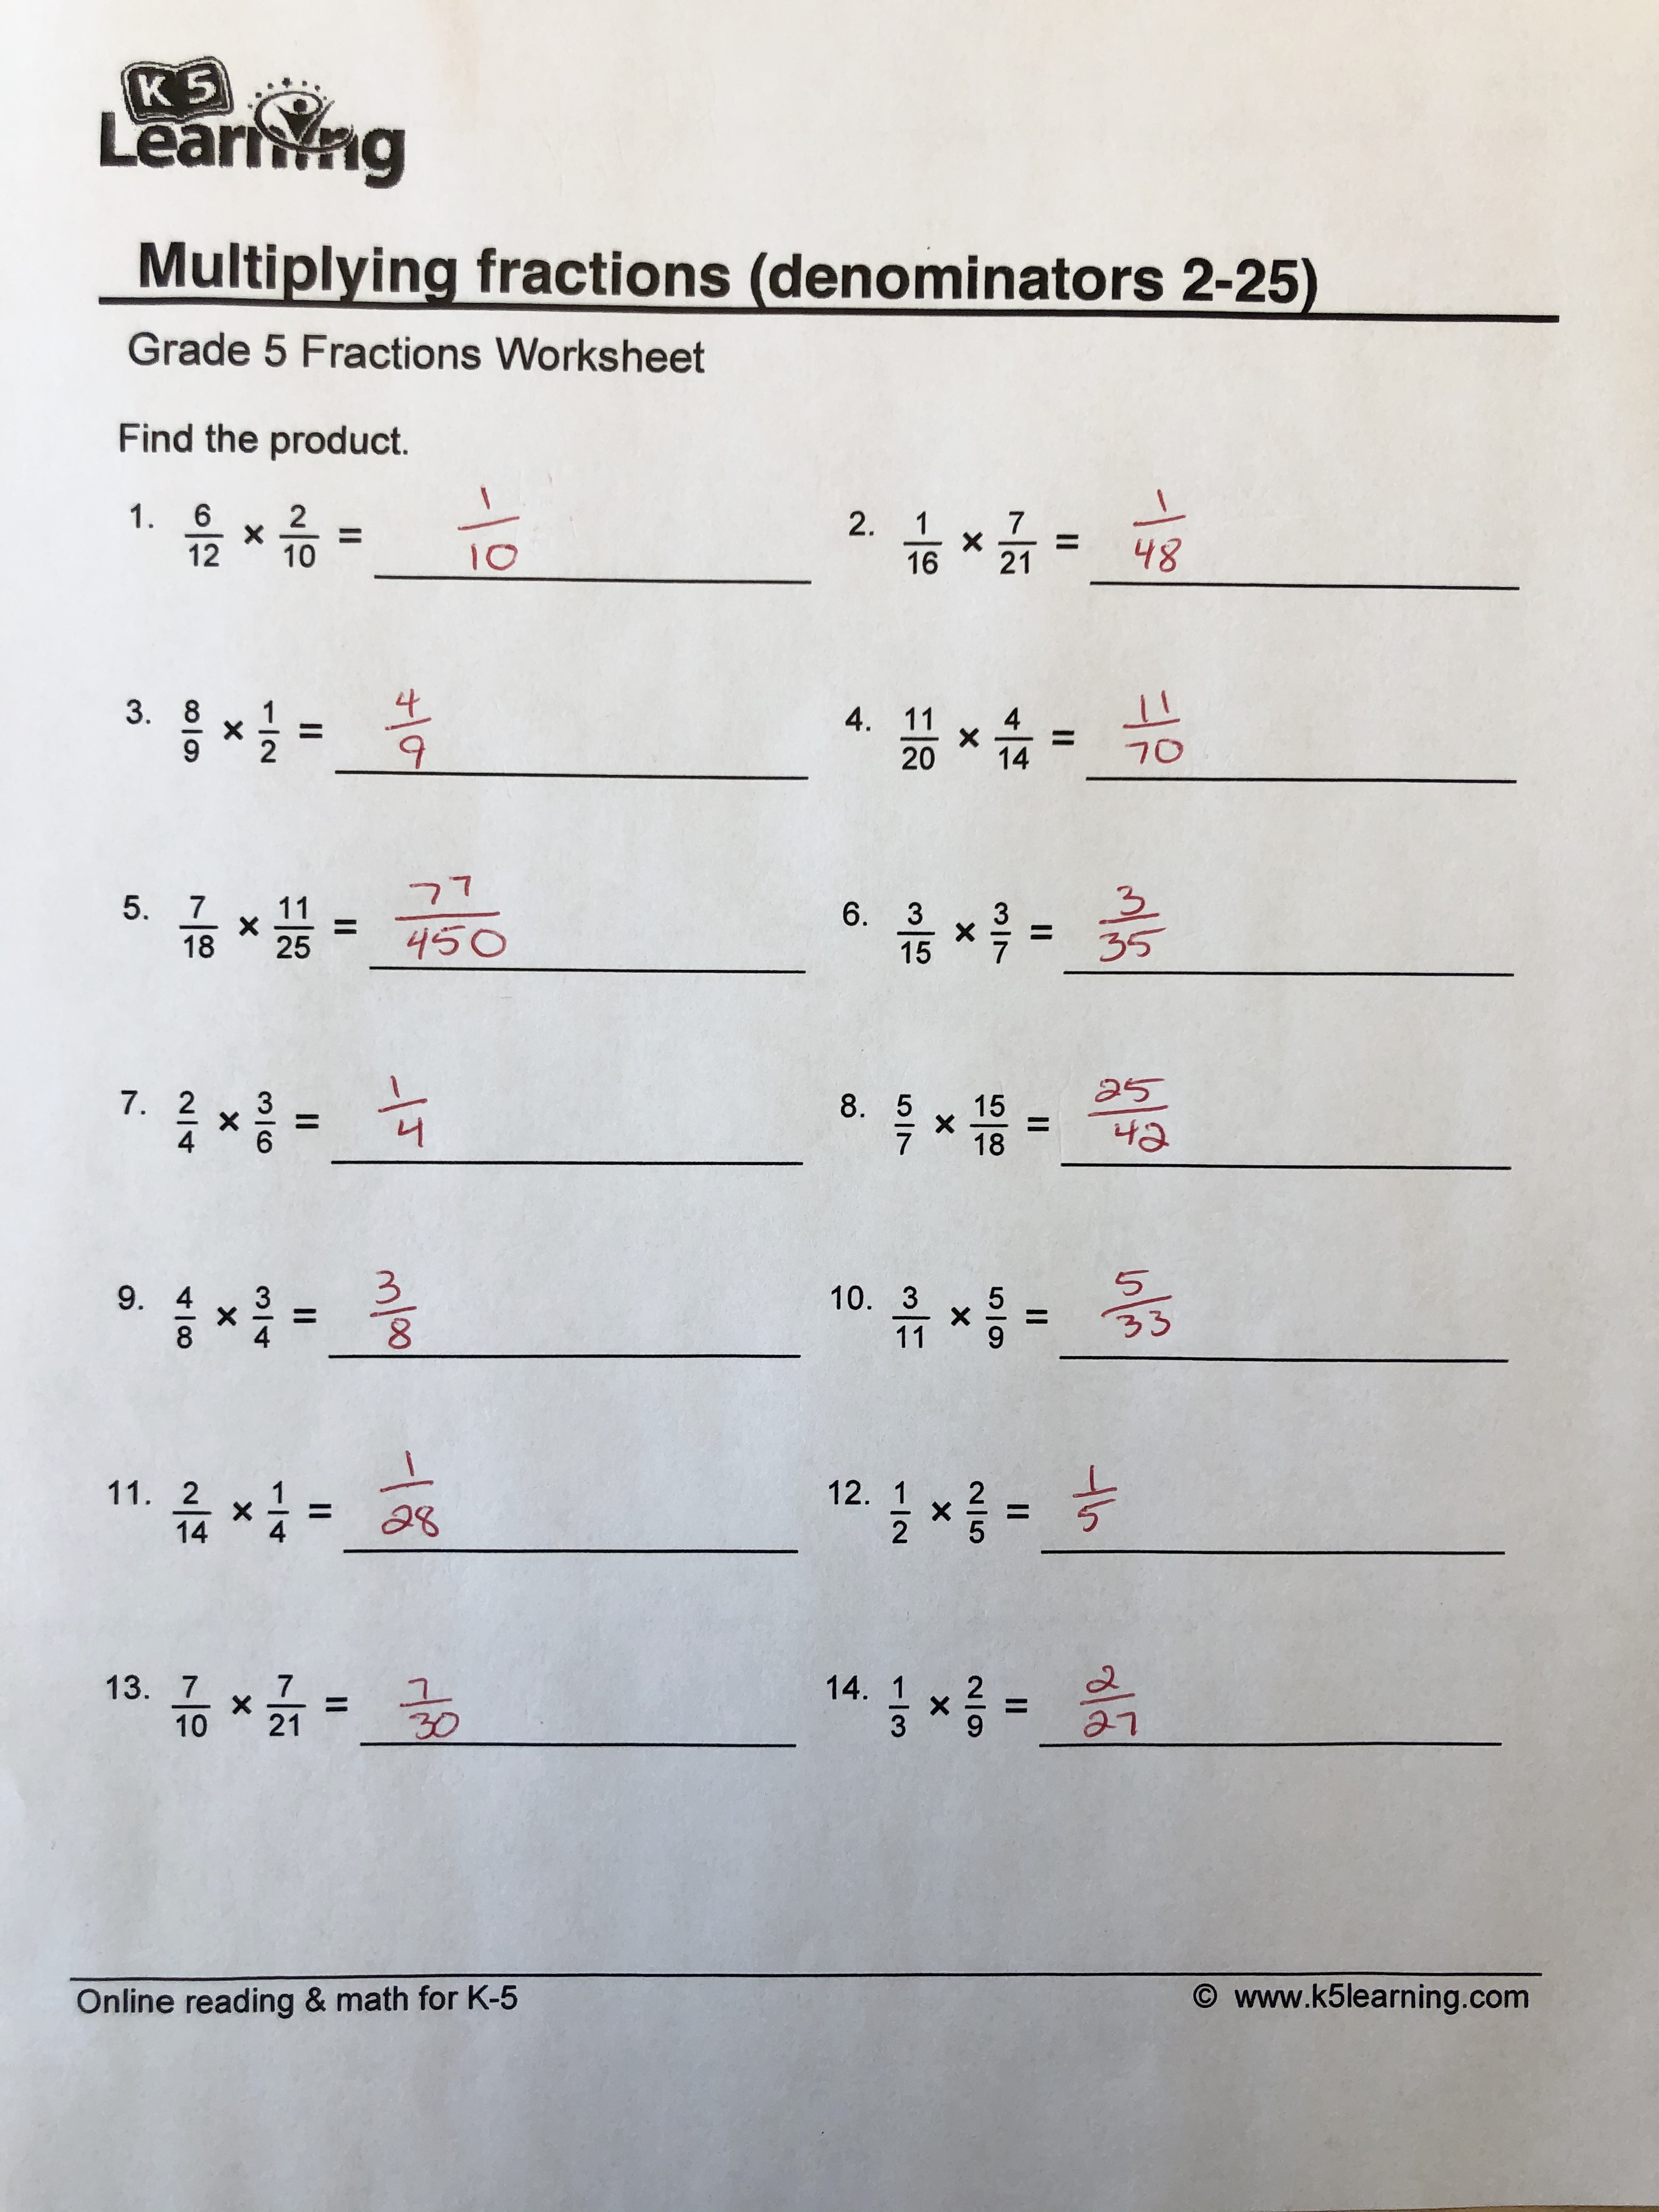 Multiplying Fractions And Whole Numbers Worksheet Answers Key